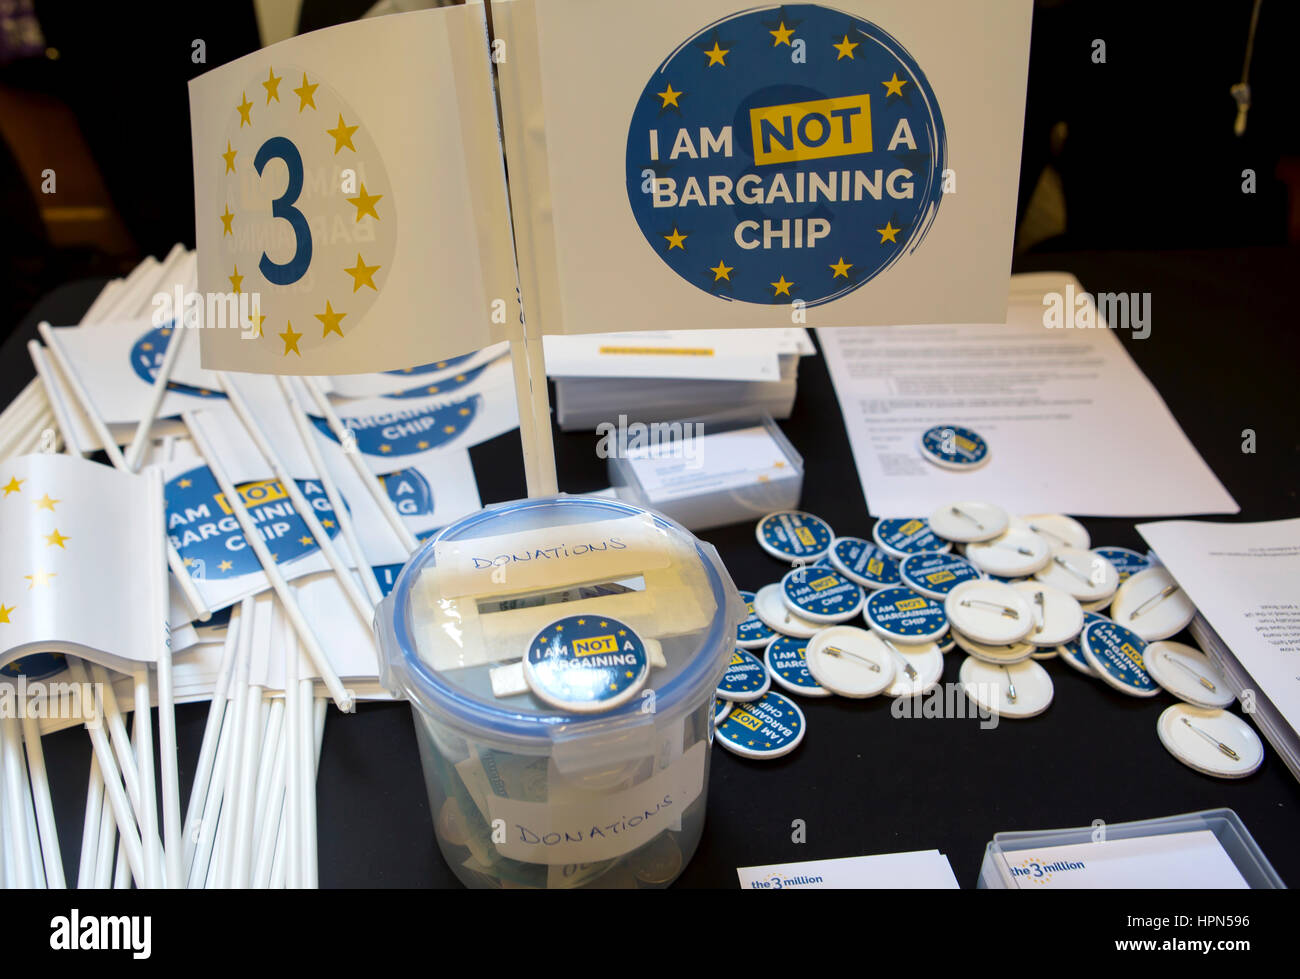 London, United Kingdom - February 20, 2017: One Day Without Us. The EU citizens in the UK have started a campaign stating they are not a bargaining ch Stock Photo